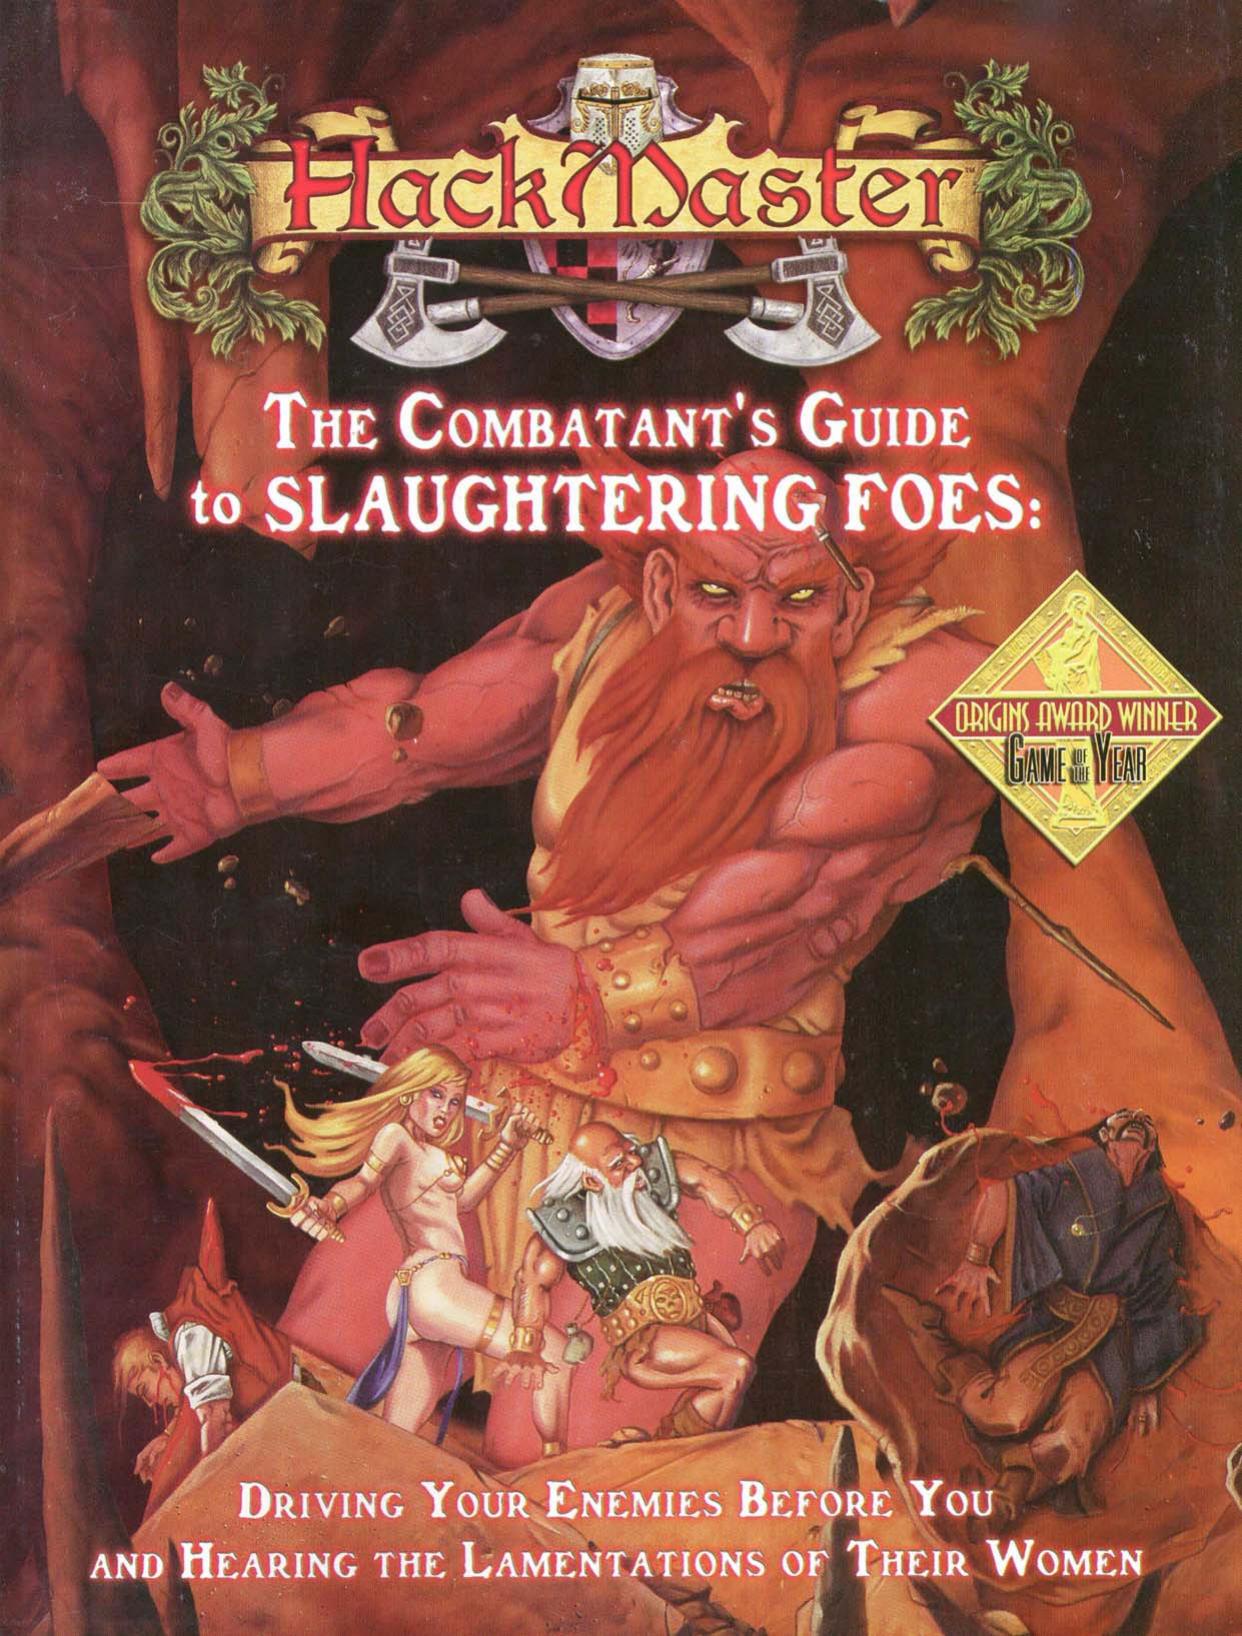 The Combatant's Guide To Slaughtering Foes